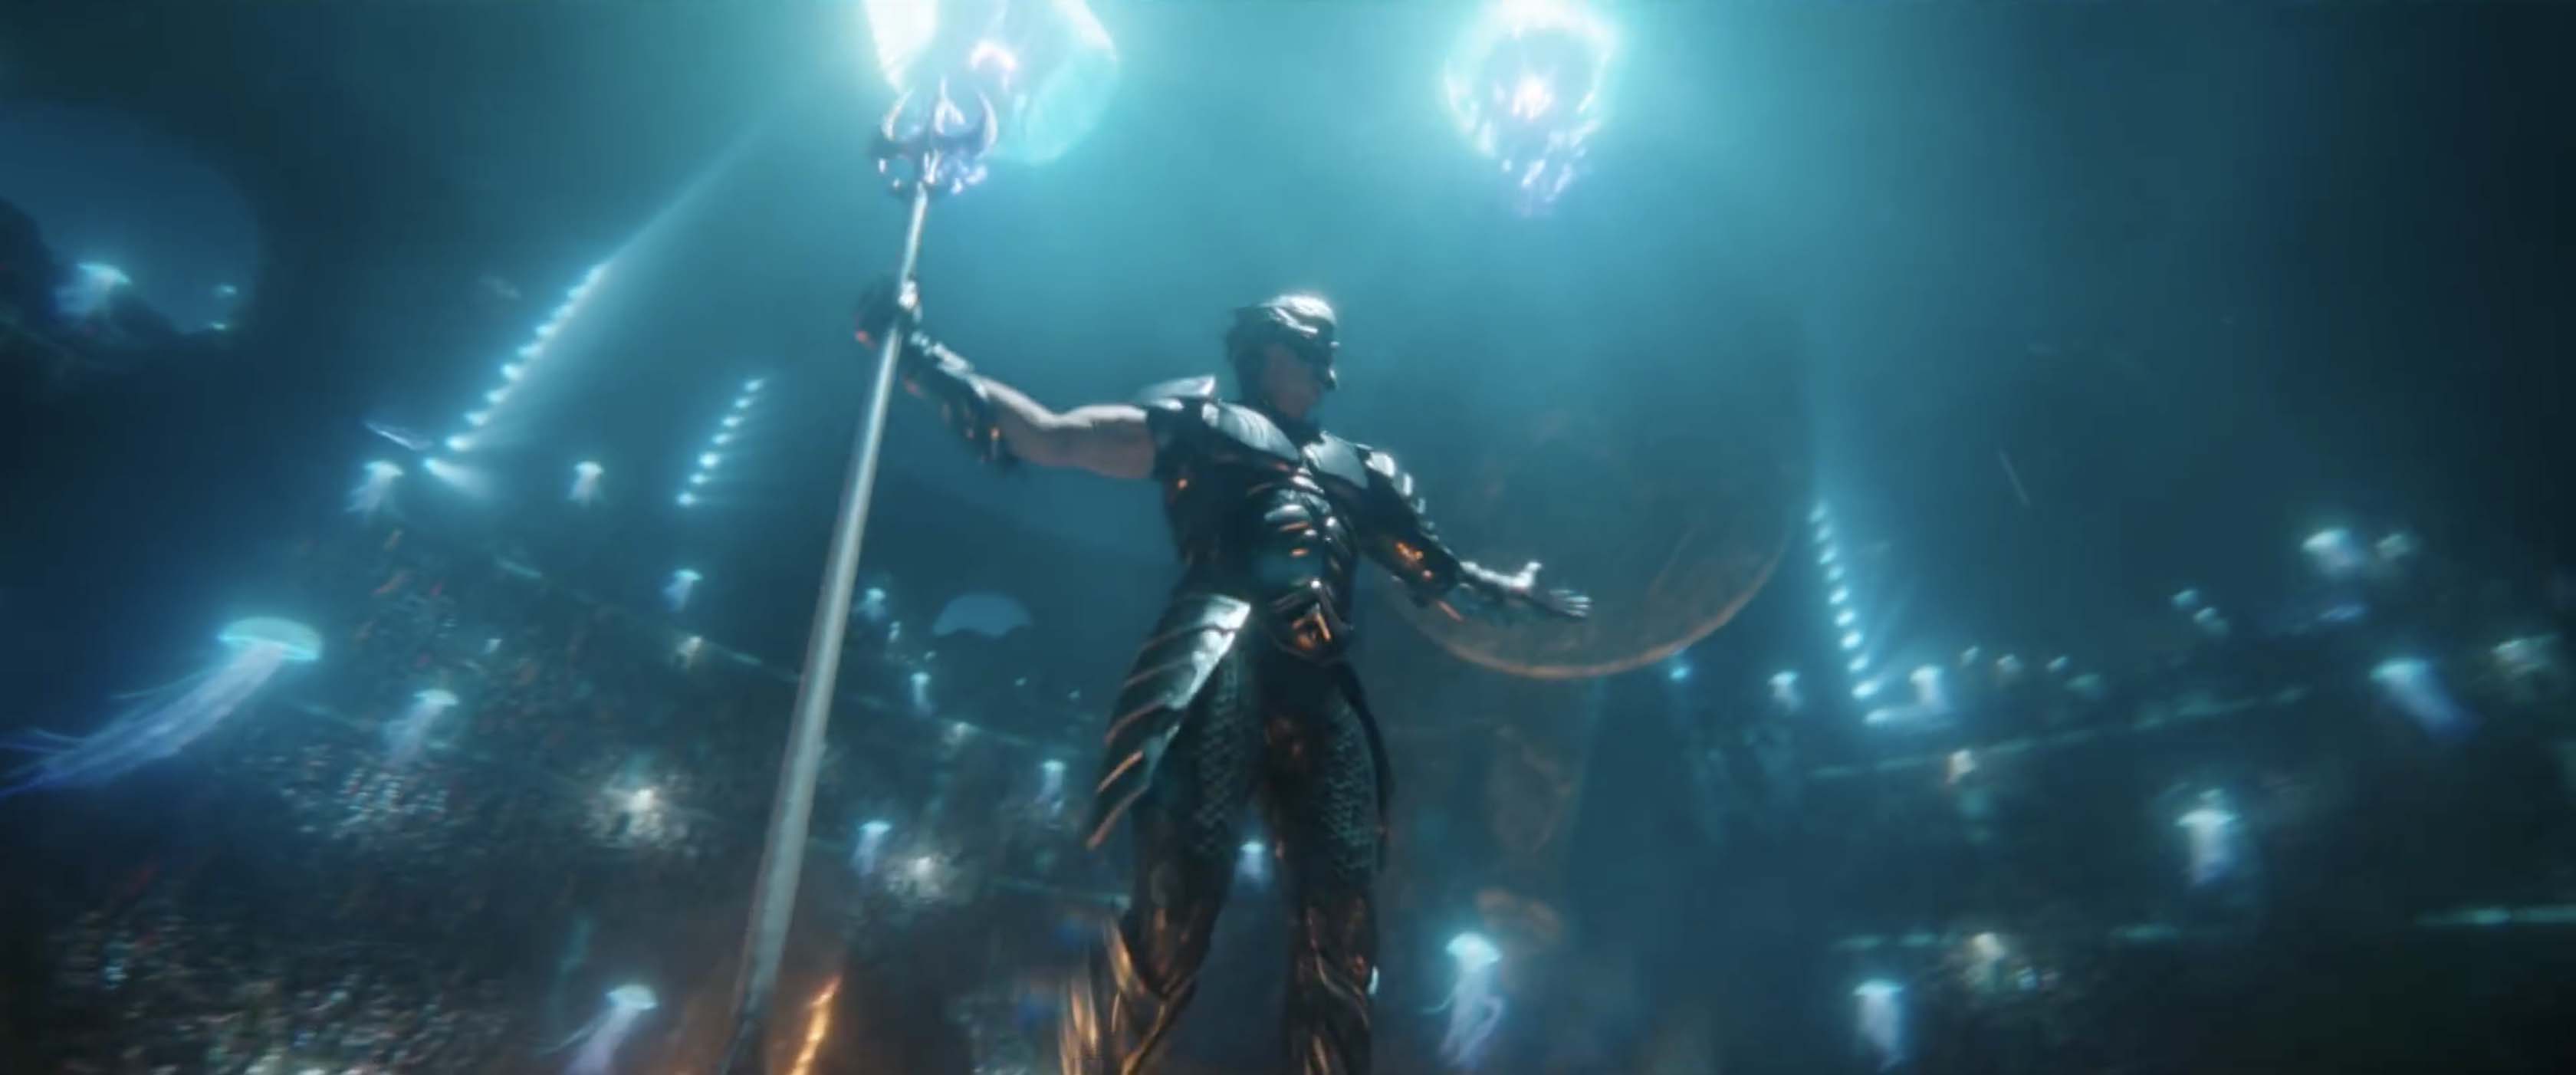 Aquaman Trailer Our First Look At The King Of The Seven